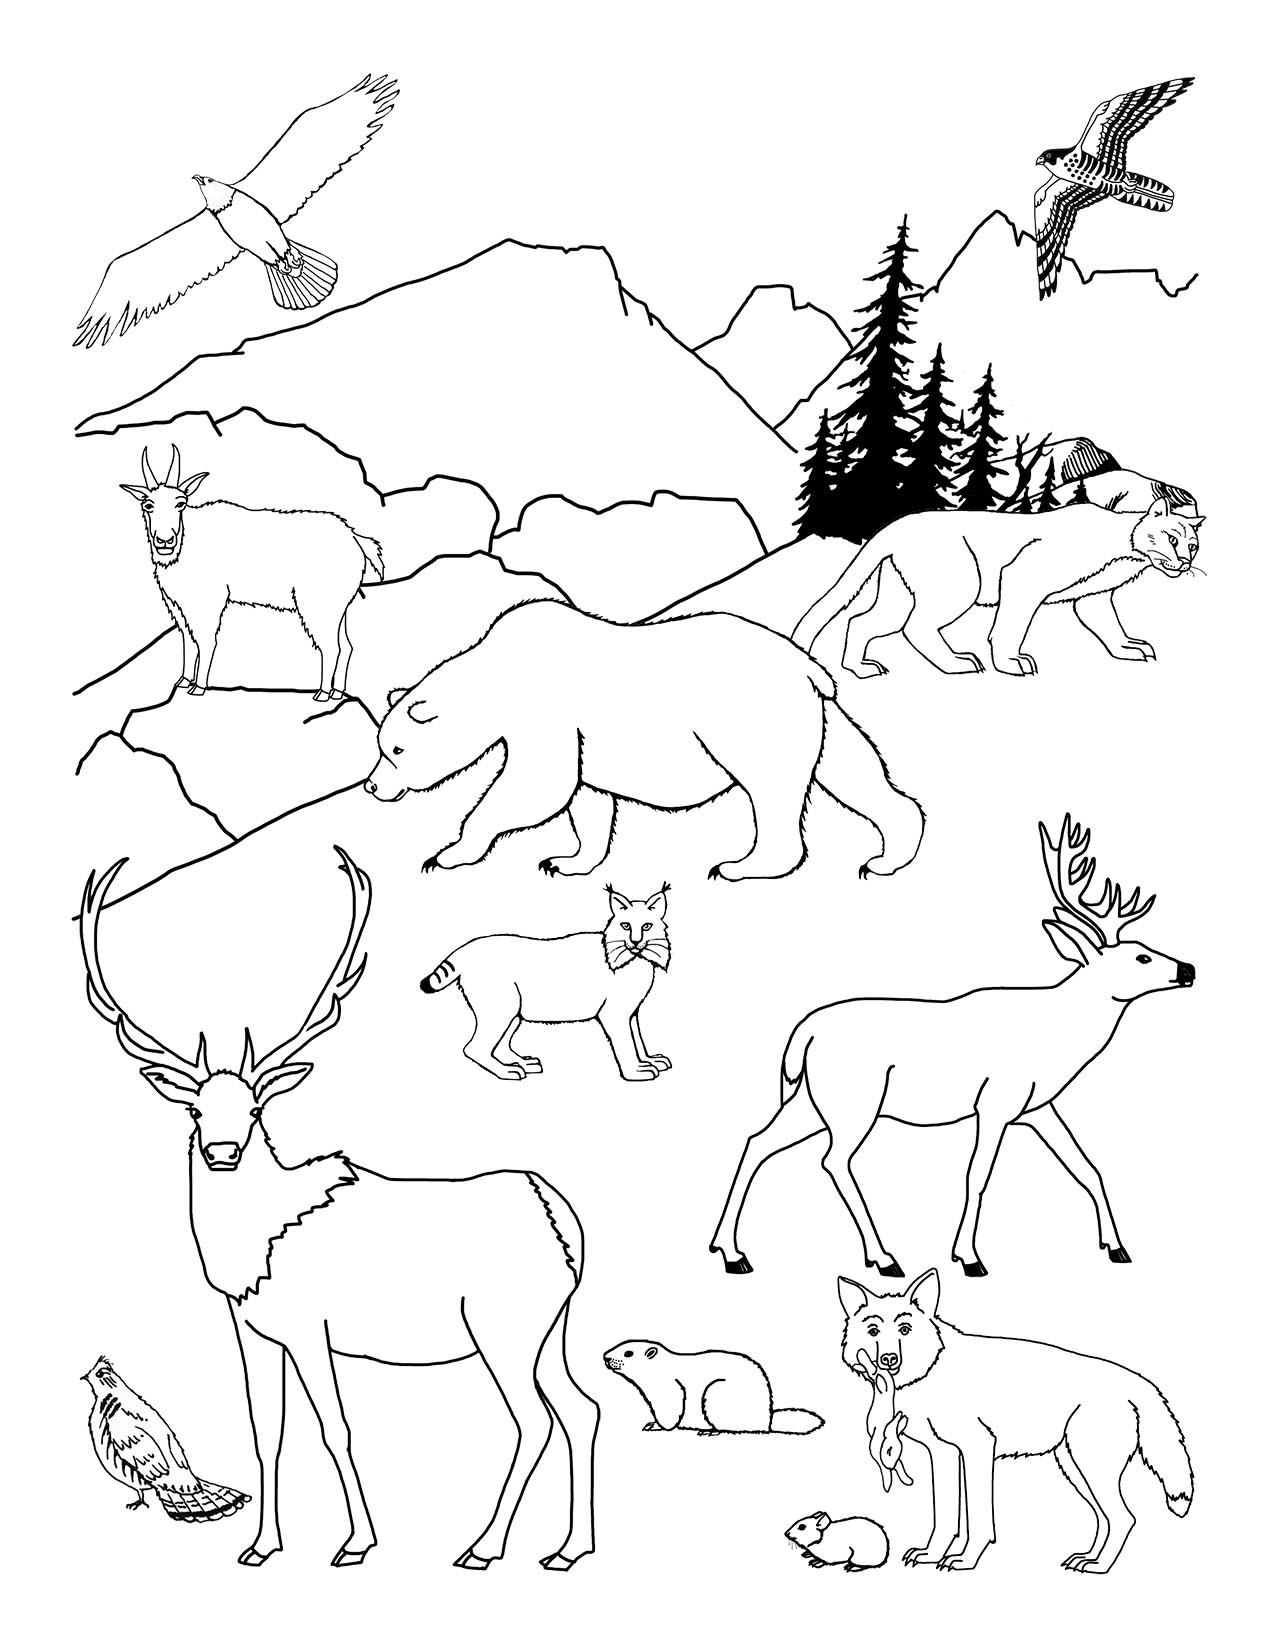 Drawing North American Wildlife - Downloadable Only